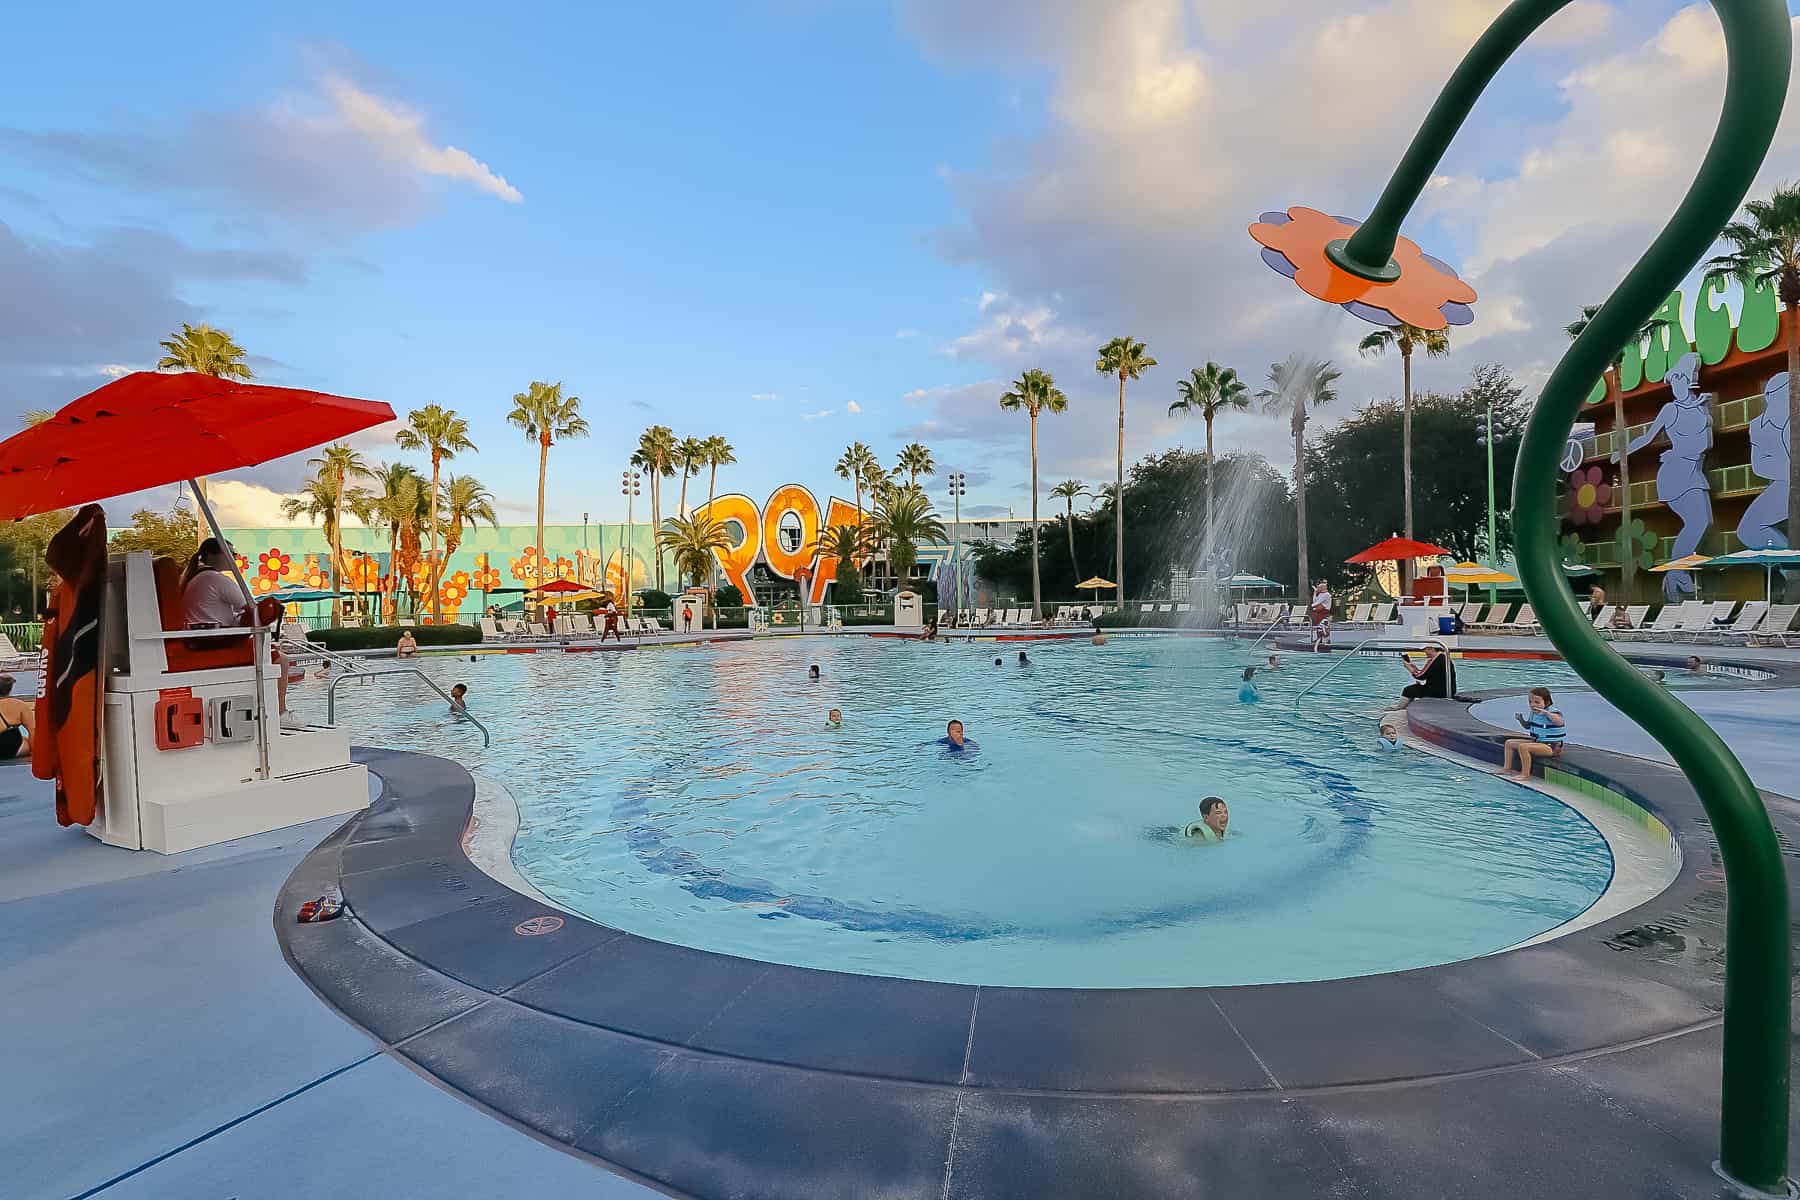 A pool at Pop Century with flower-shaped water jets. 